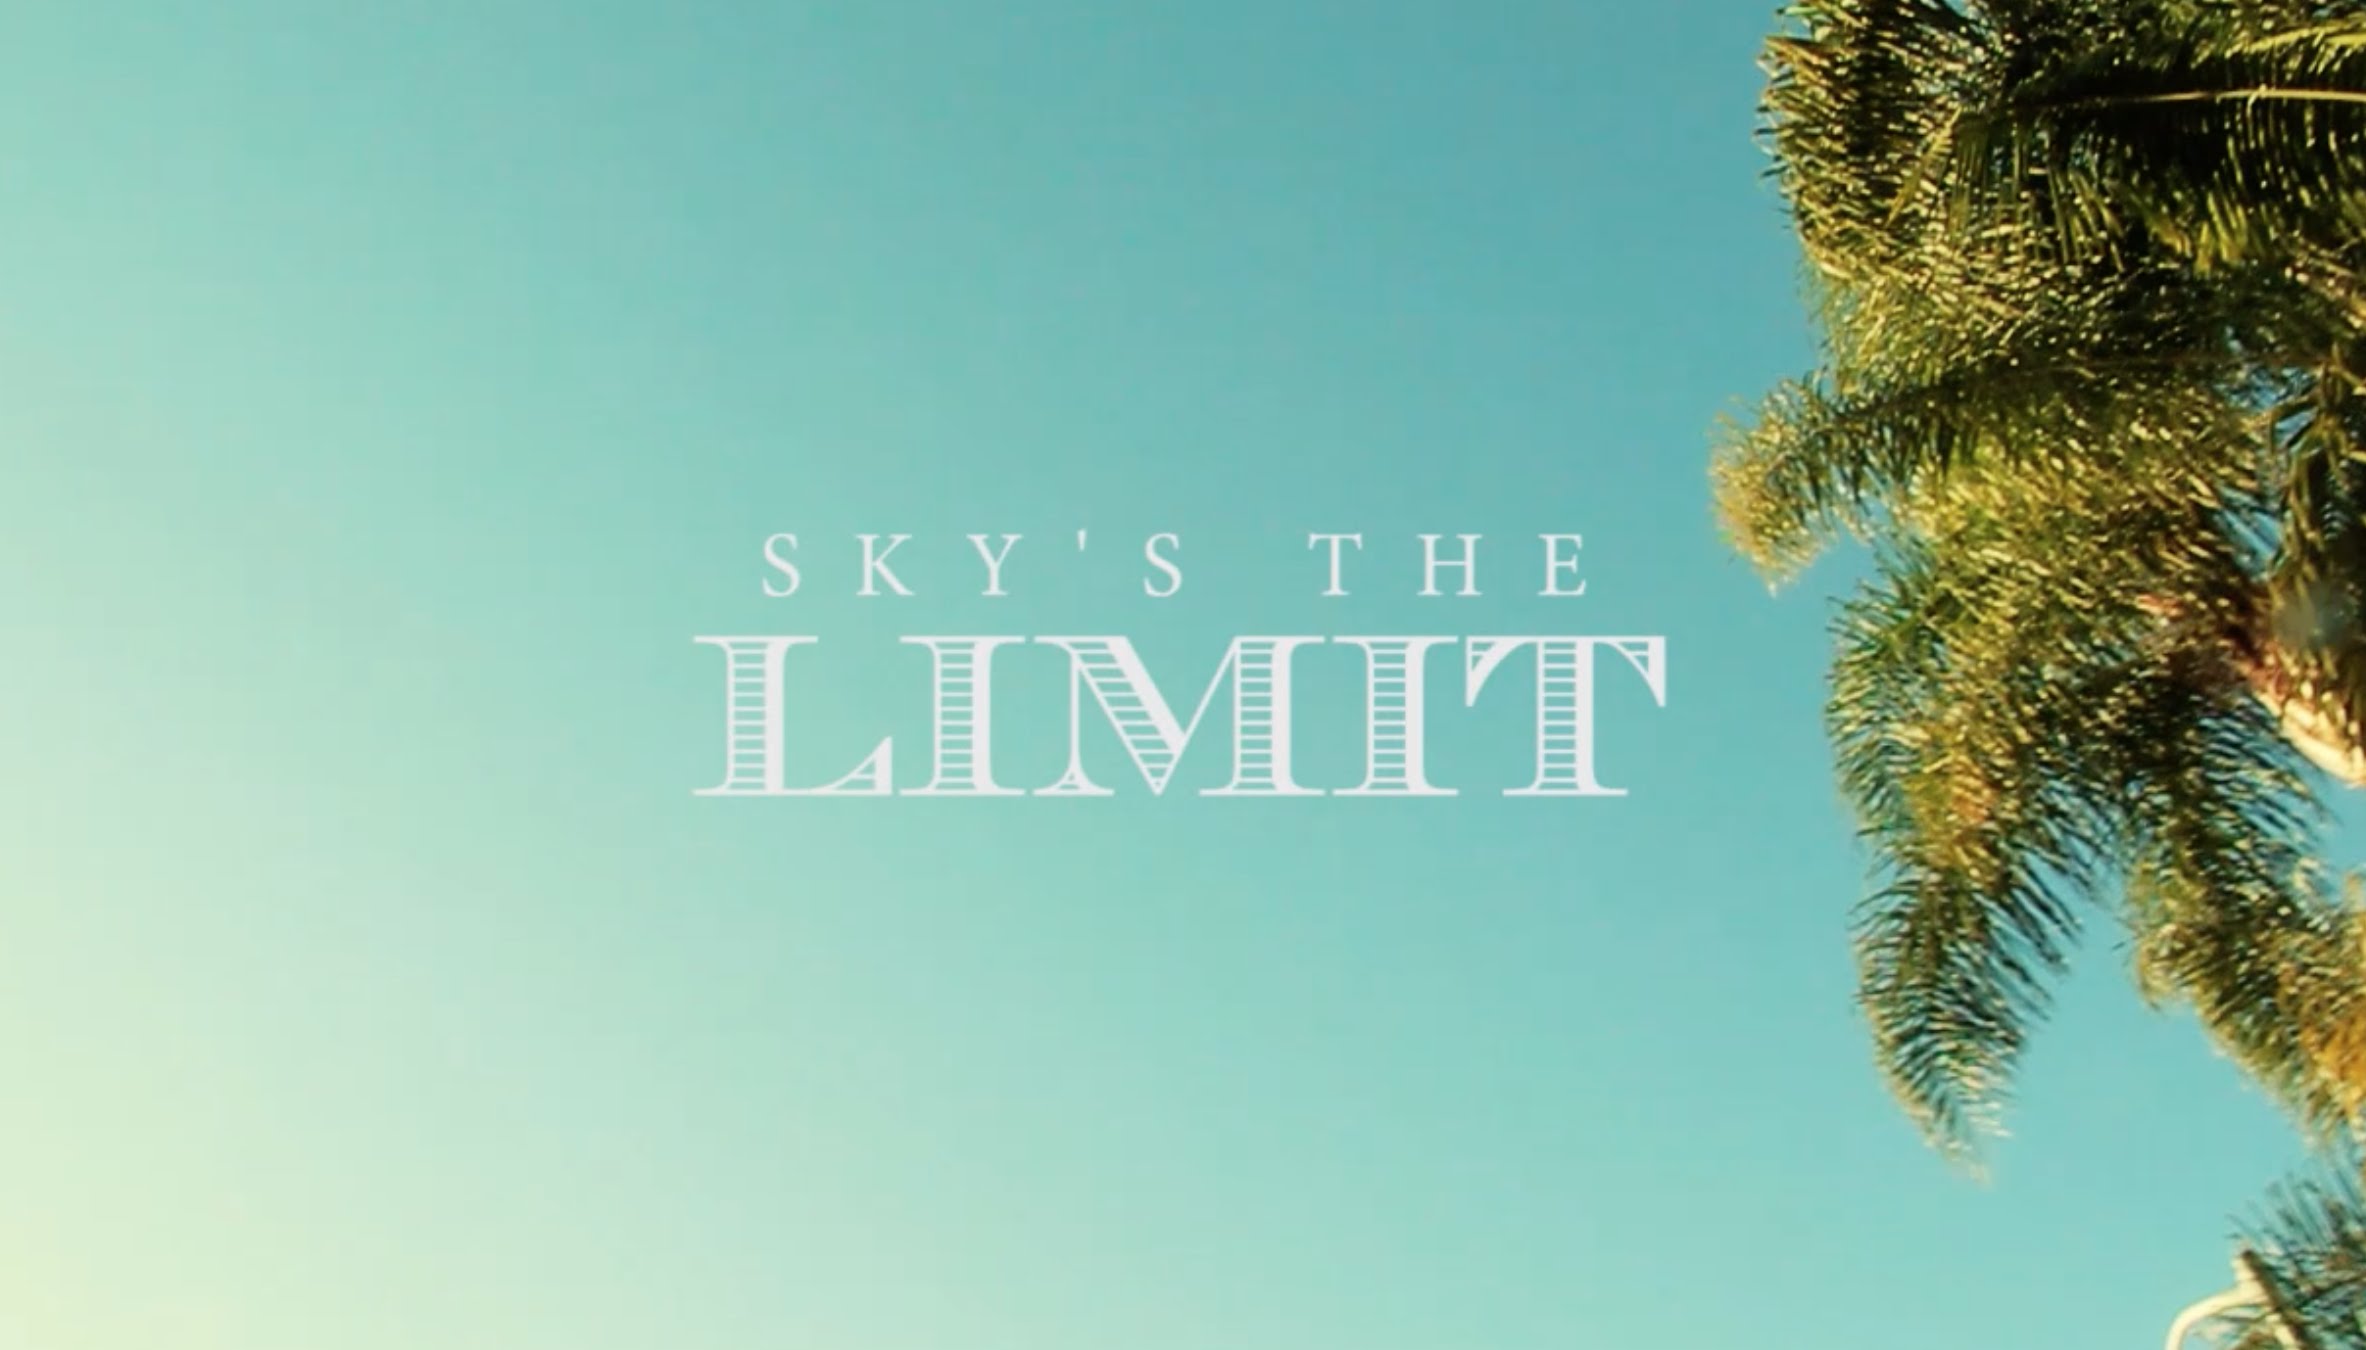 LOOSELYRIC FT. I-ROCC - SKY'S THE LIMIT - YouTube